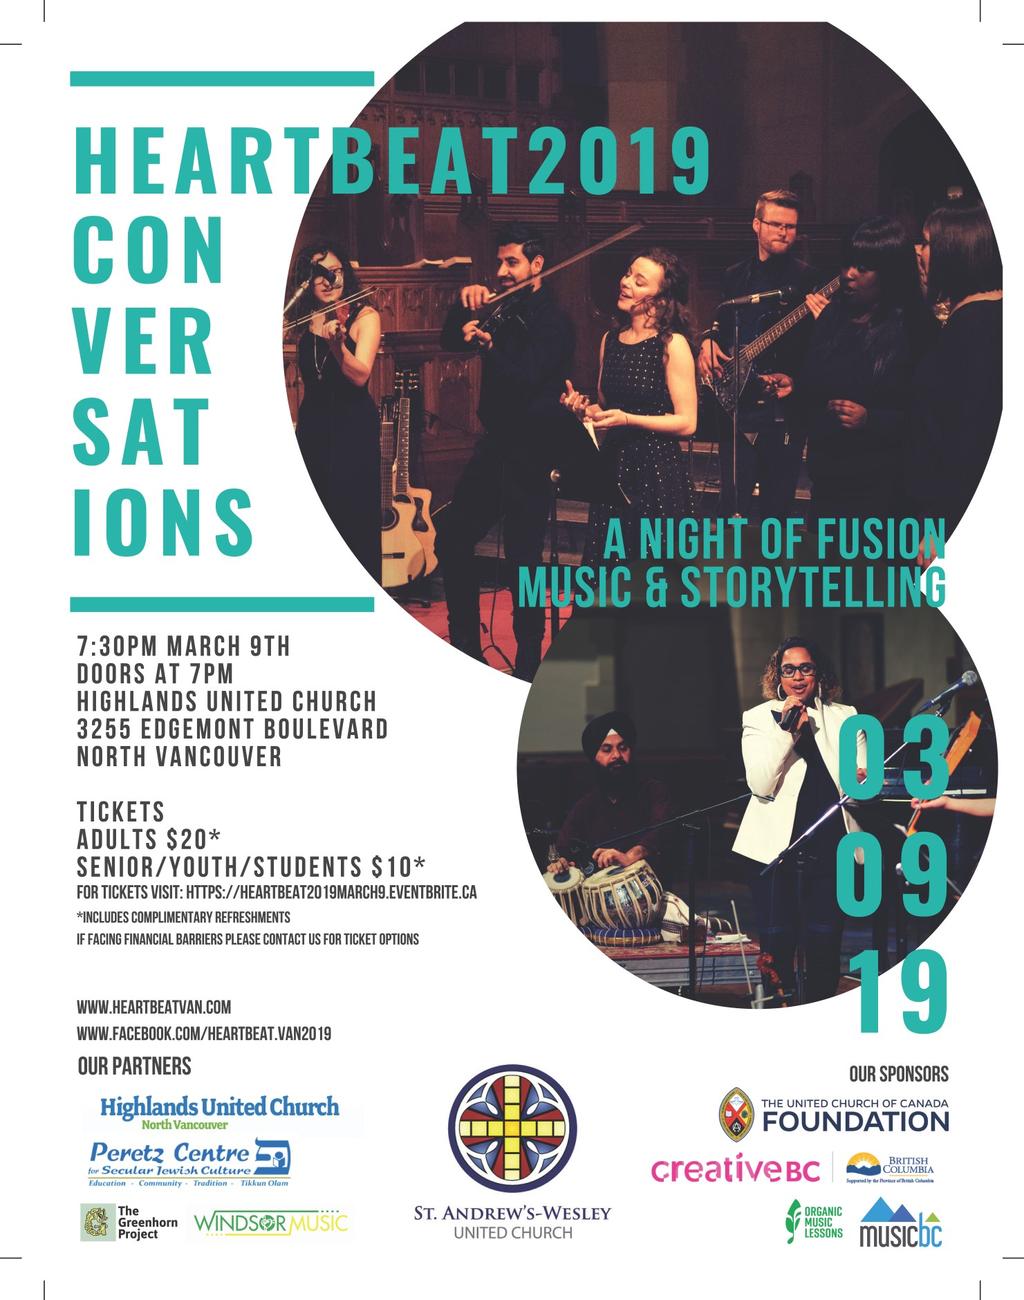 HEARTBEAT 2019 Saturday, March 9 at 7pm at Highlands United Church Heartbeat is a concert and youth-led peacebuilding event that features Vancouver musicians of different backgrounds creating